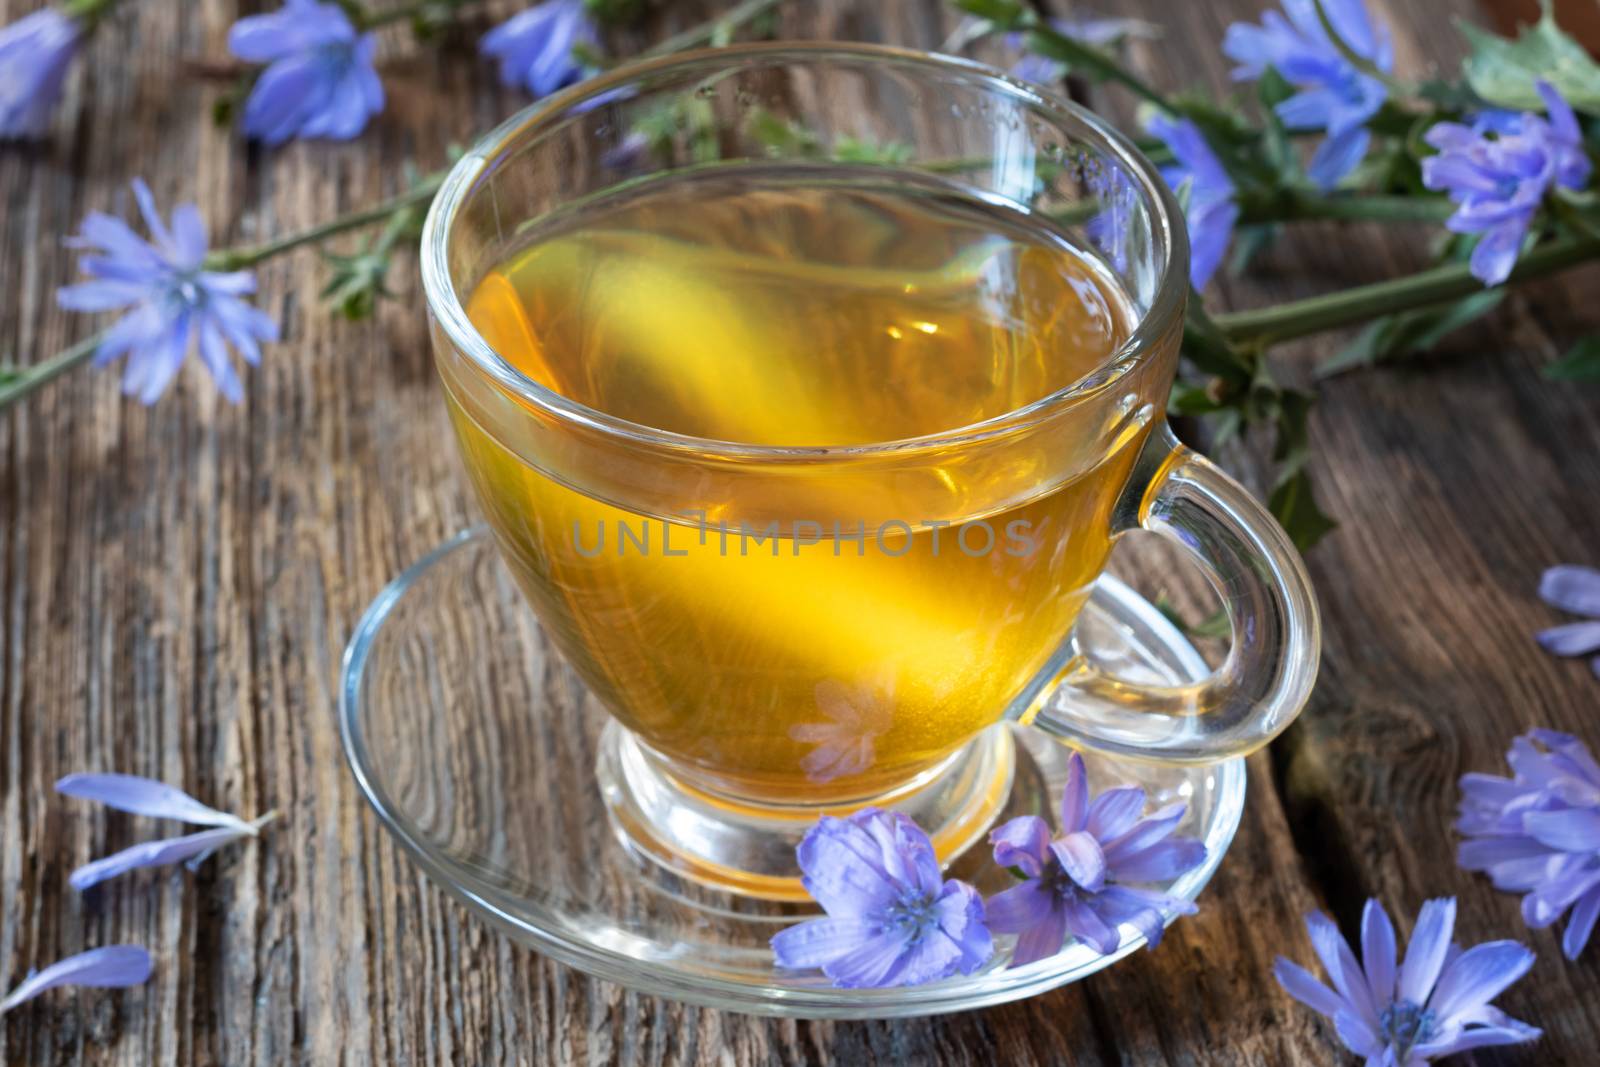 A cup of chicory tea with fresh flowers